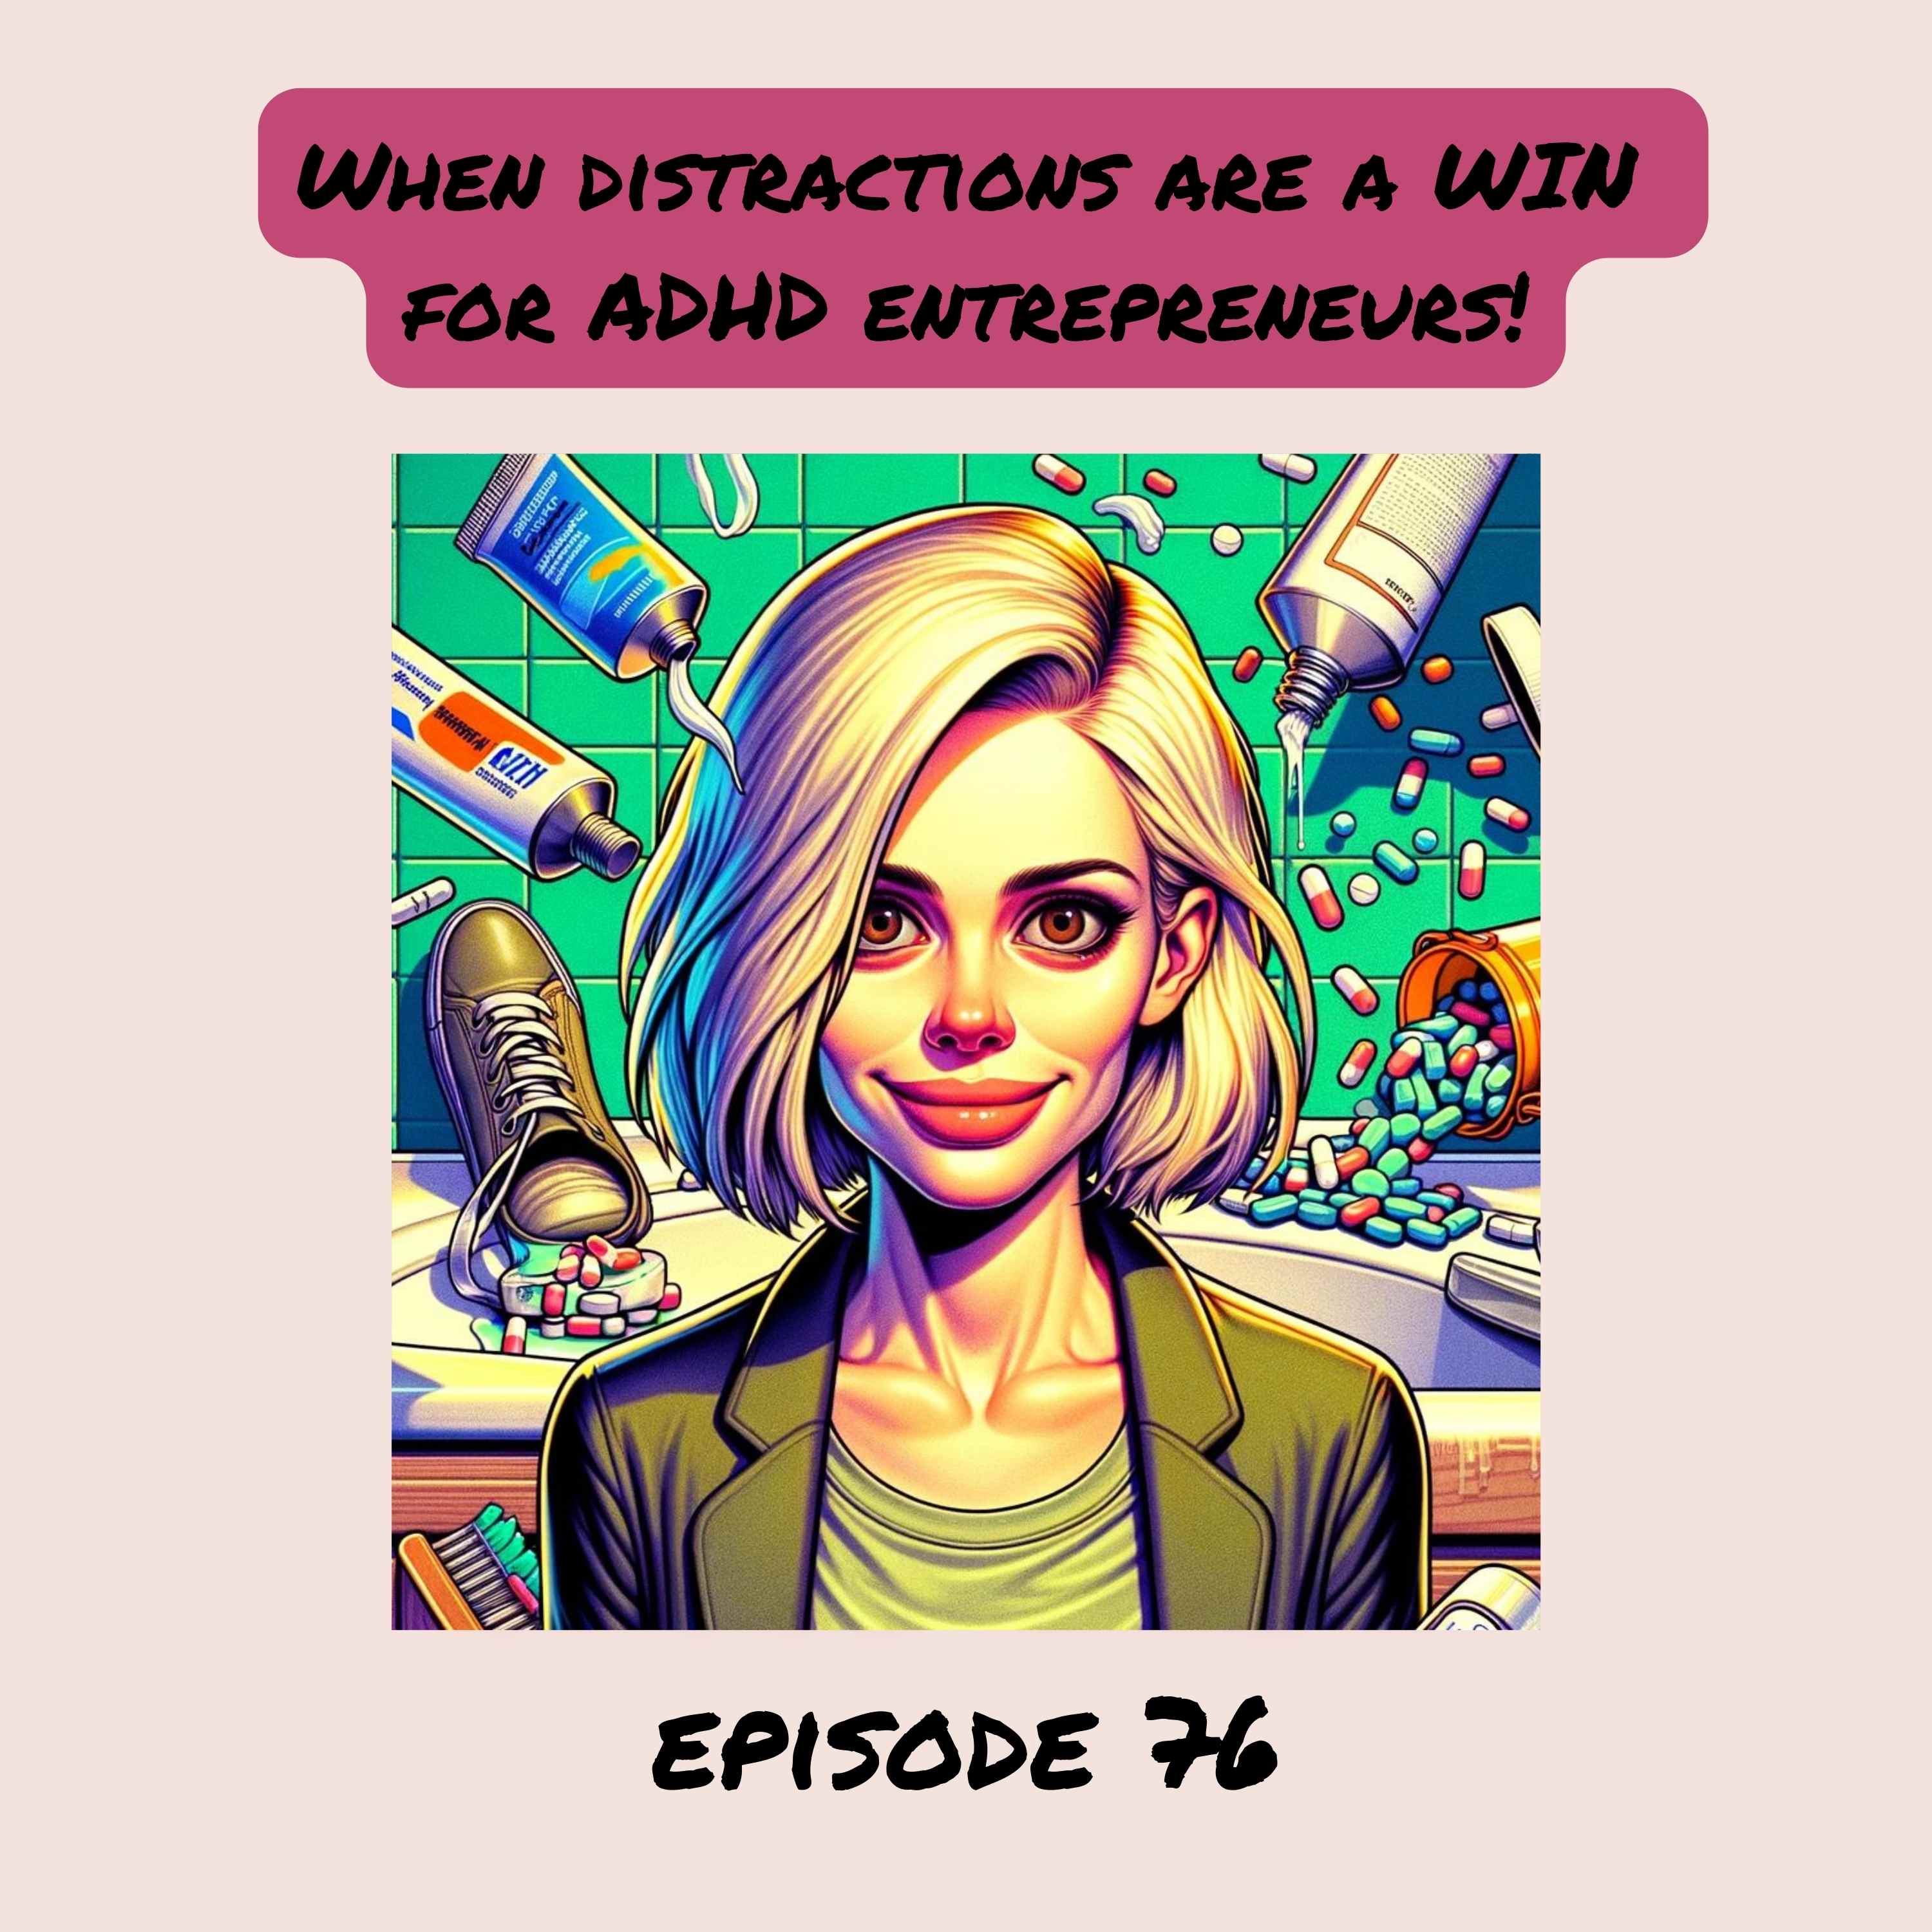 Let’s USE distraction to grow a business! Even with ADHD!